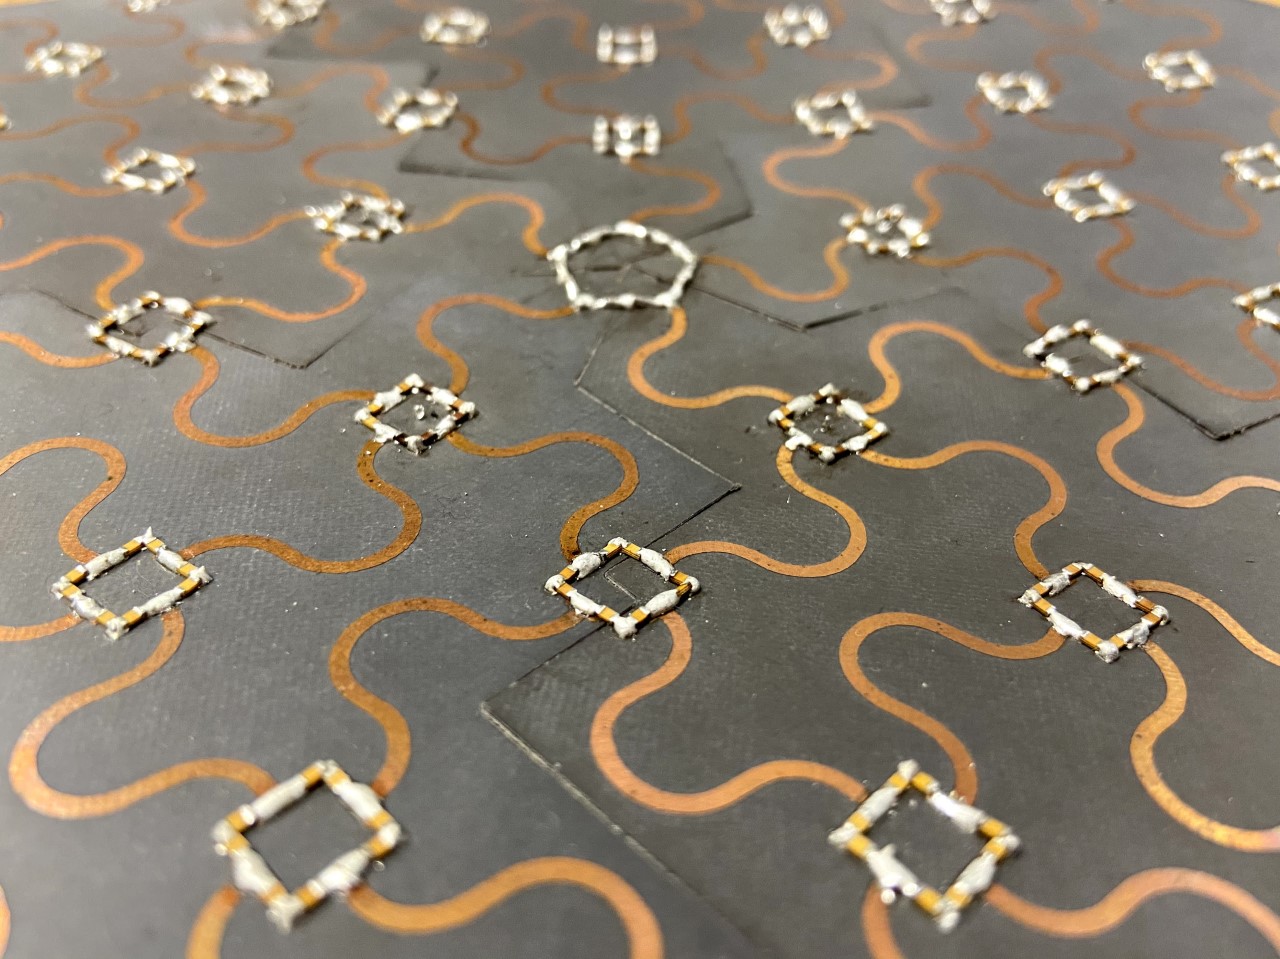 Photo of a metamaterial composed of a pattern of resonators. The defect appears as a pentagon in an otherwise regular array of circuit elements. (Credit: K. Peterson)